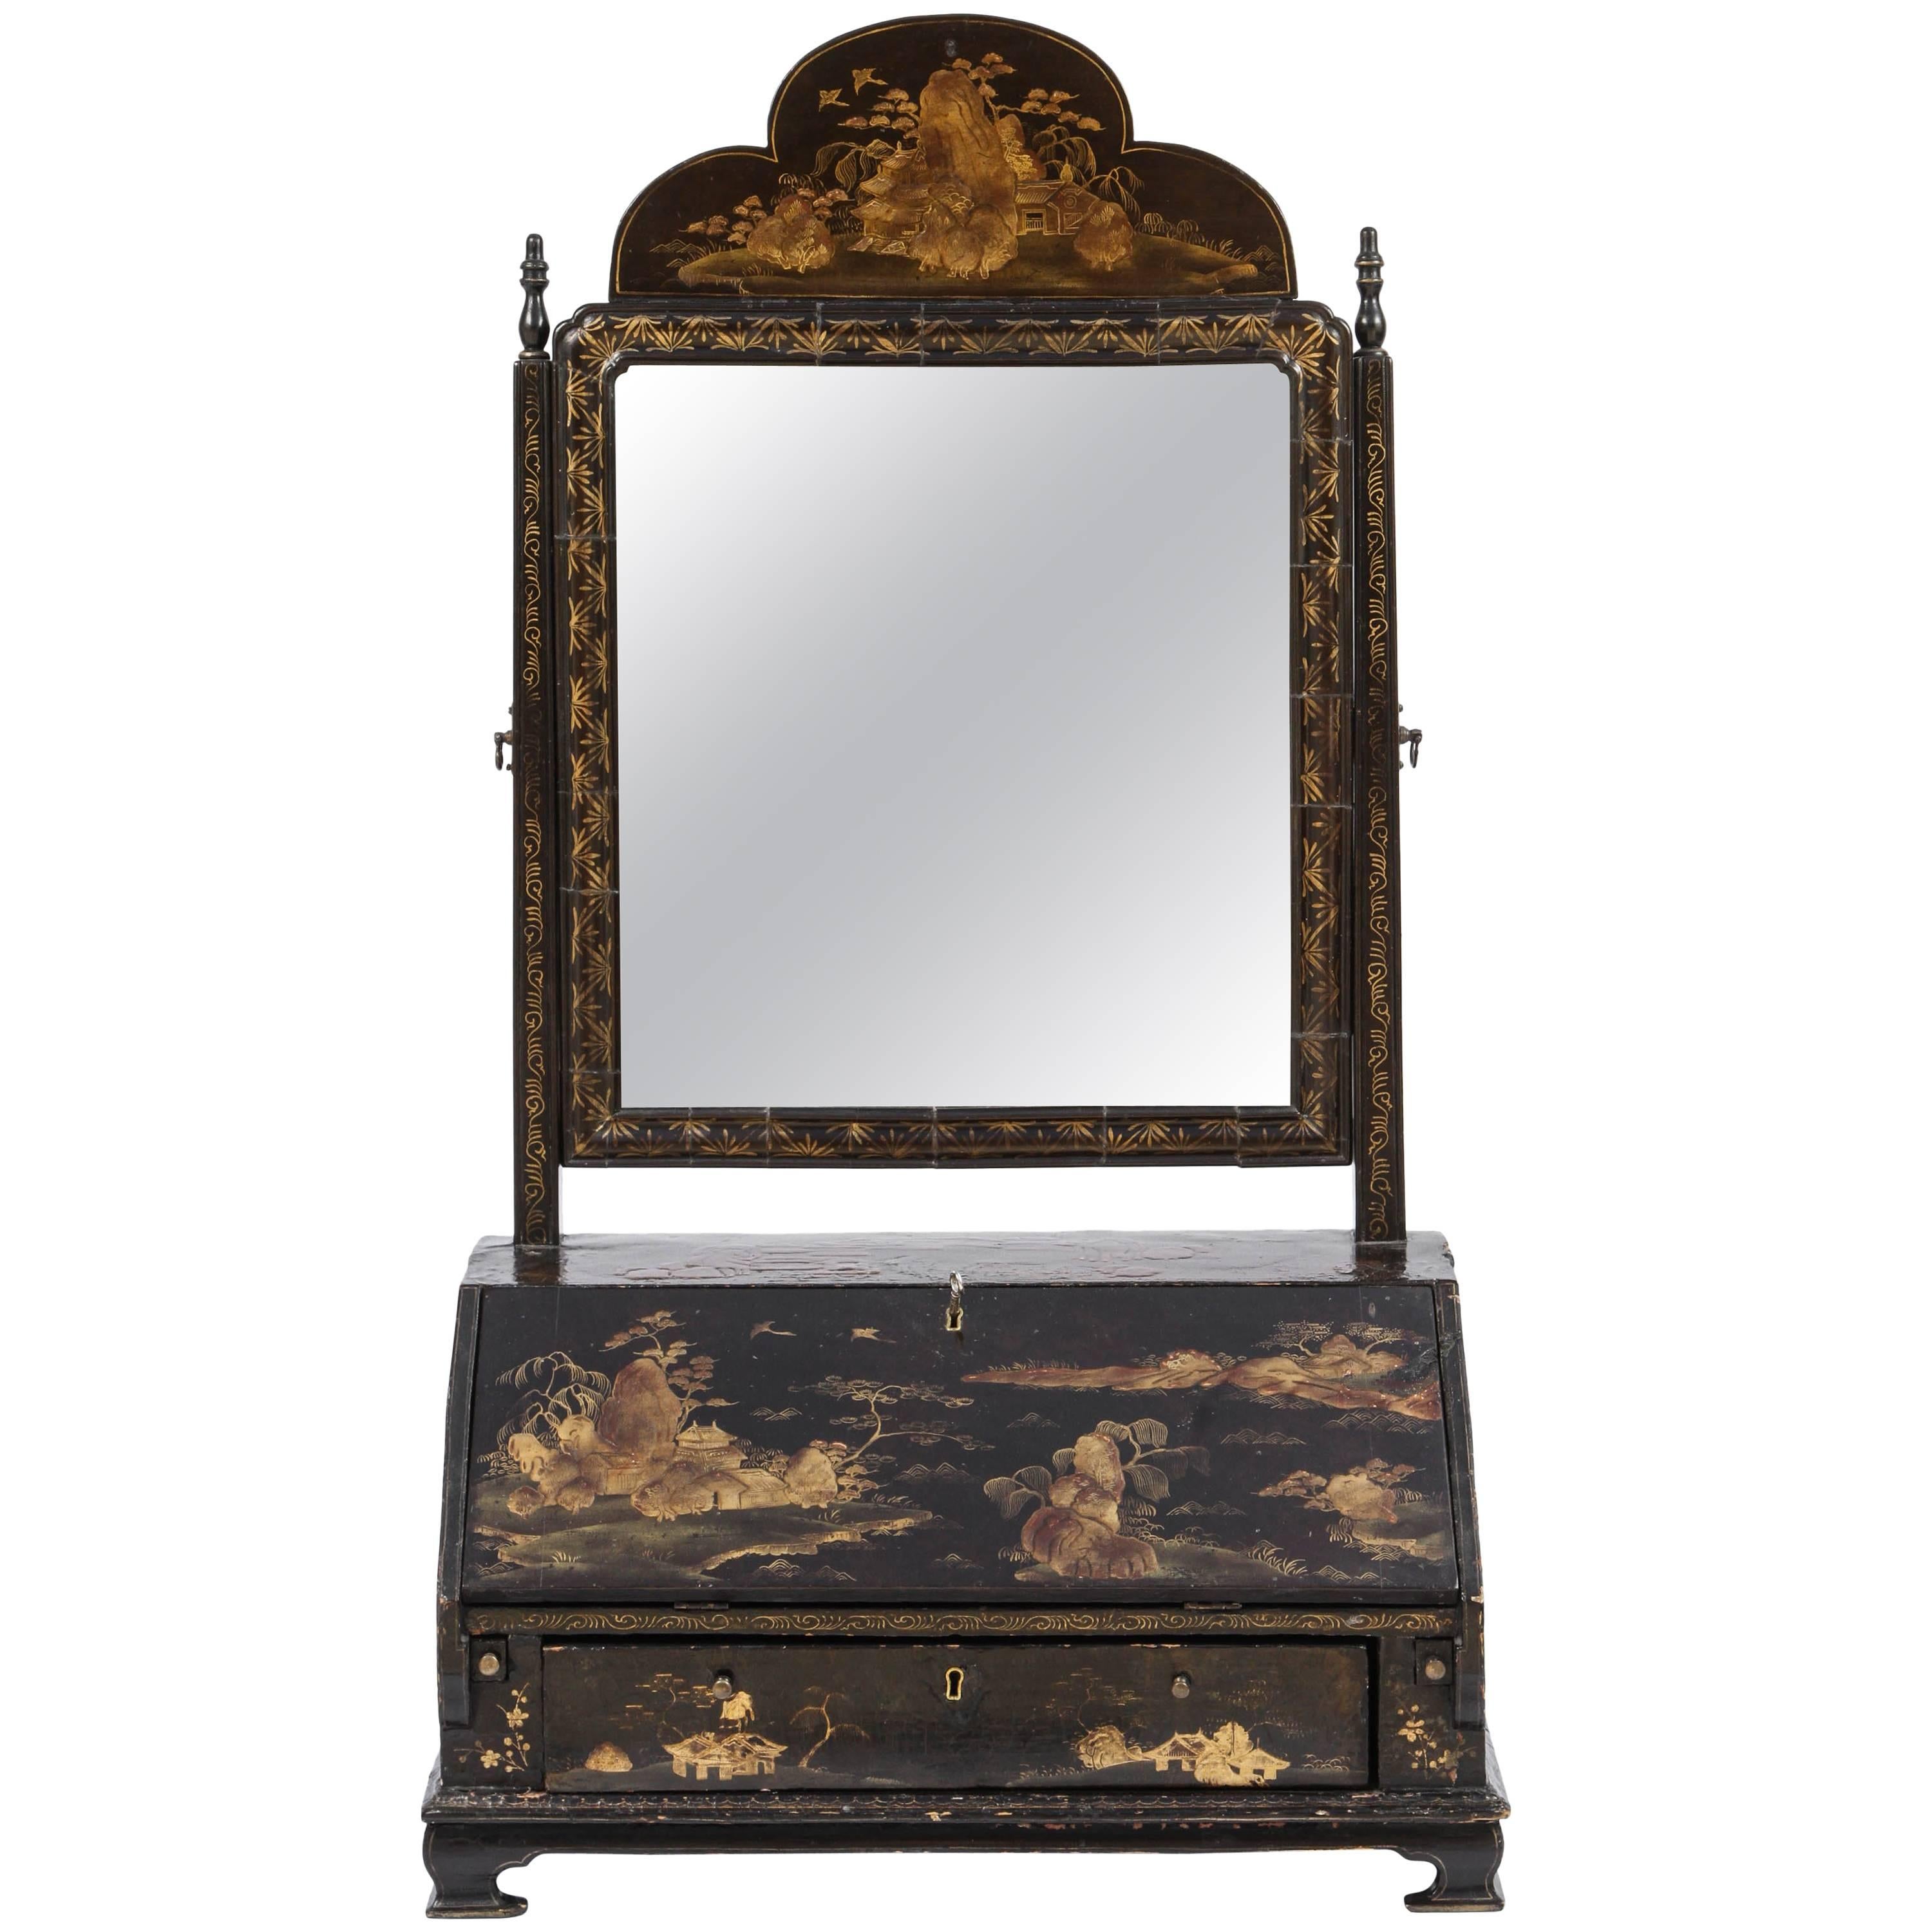 19th Century English Chinoiserie Miniature Desk with Mirror